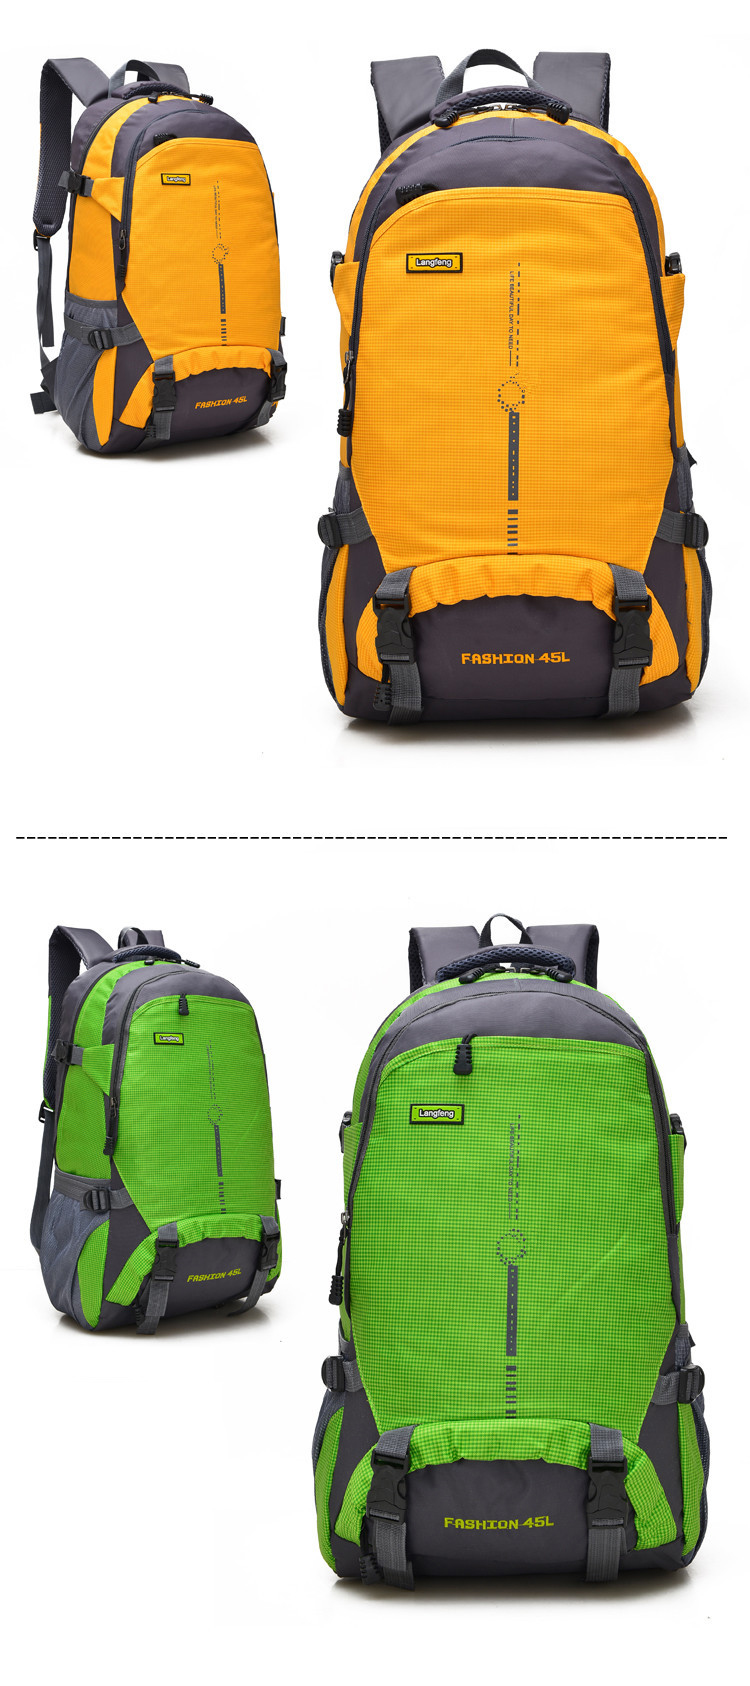 45L 25L Outdoor Backpack Mountaineering Bag Men's and Women's Backpack Sports Travel Laptop School Bag